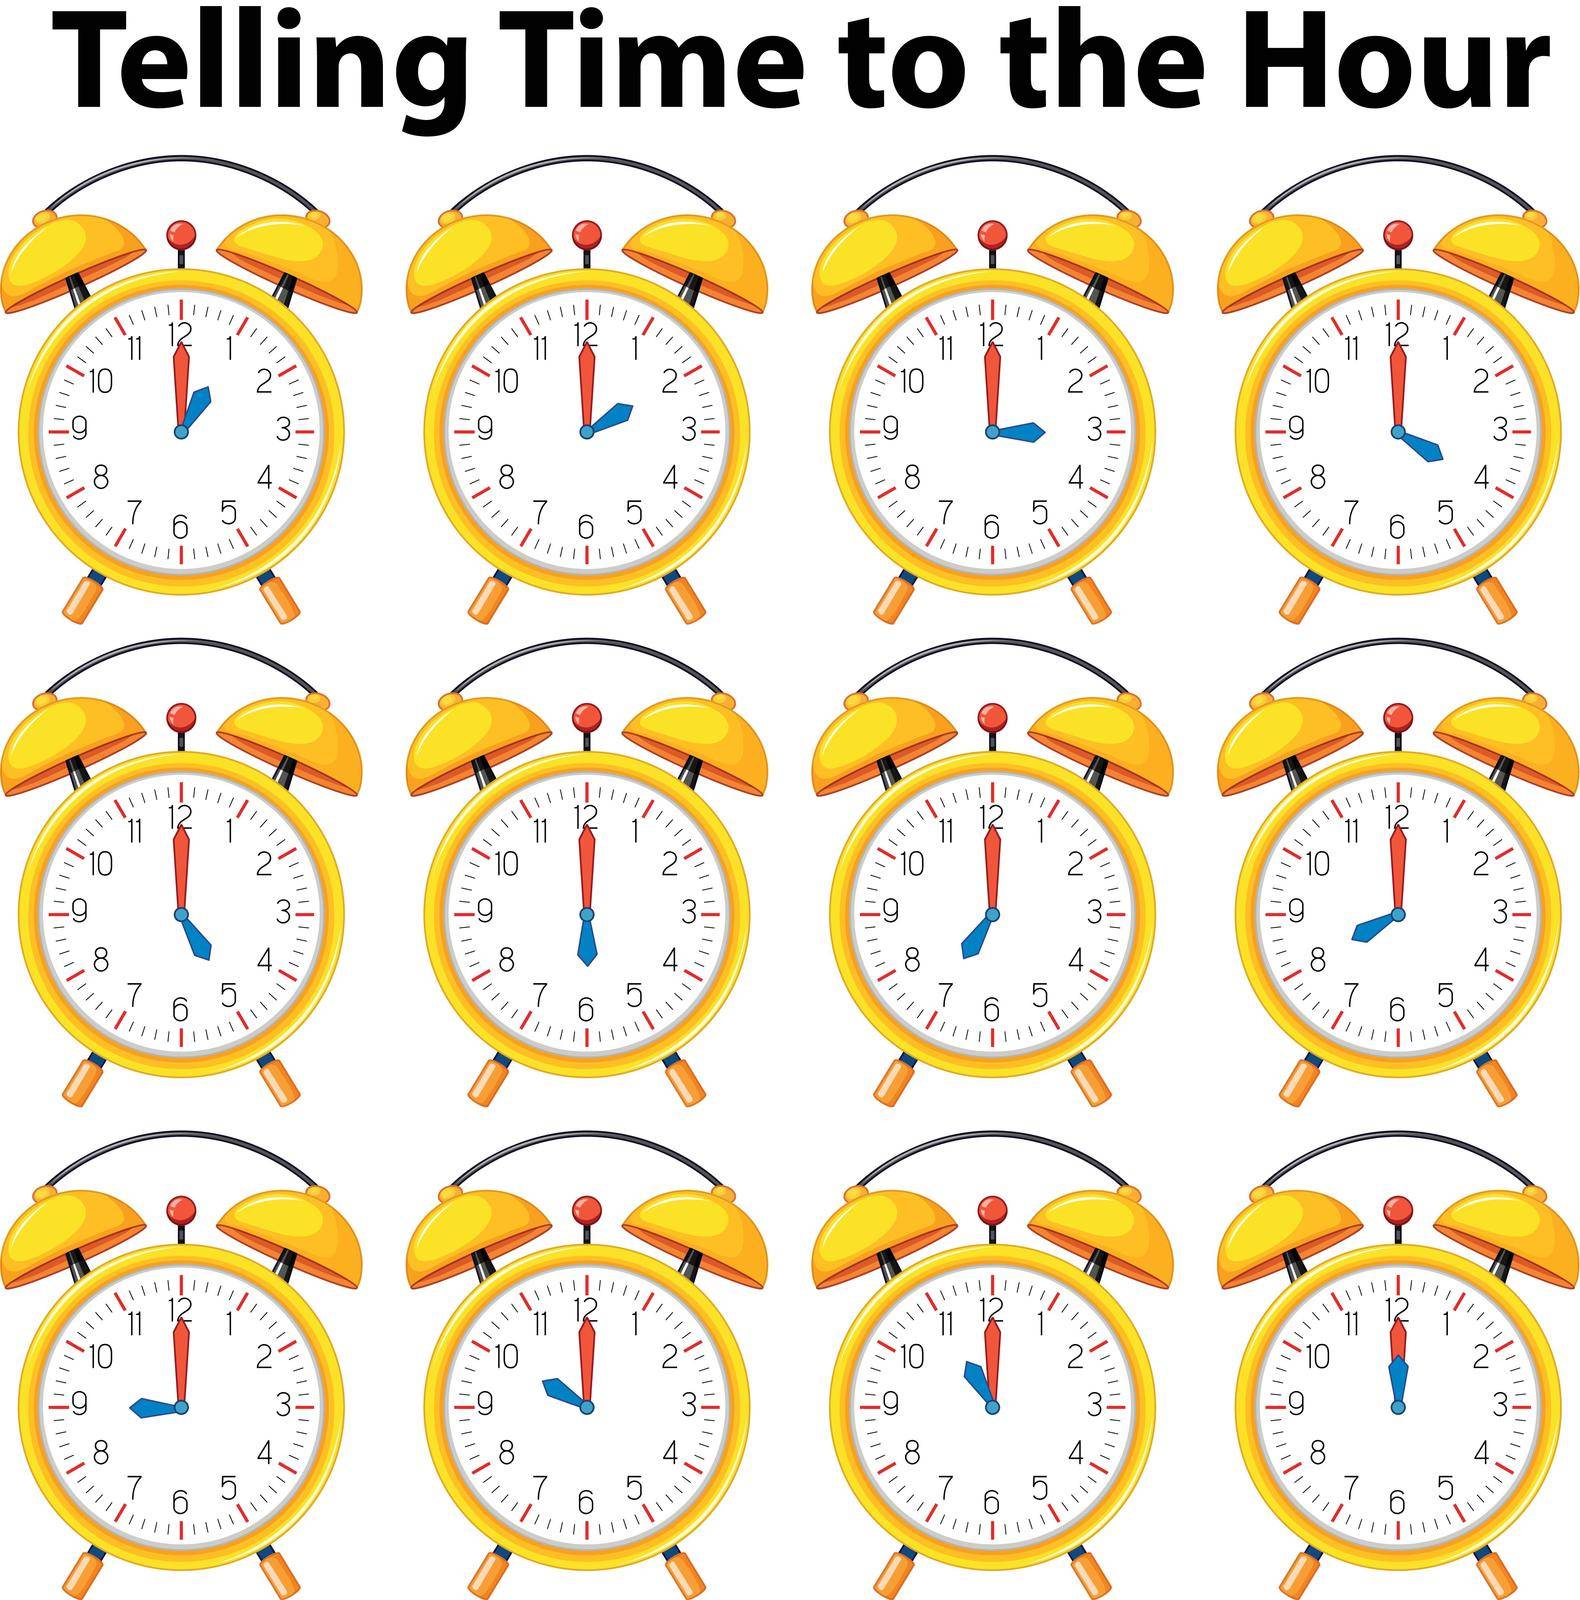 Telling time to the hour on yellow clock by iimages